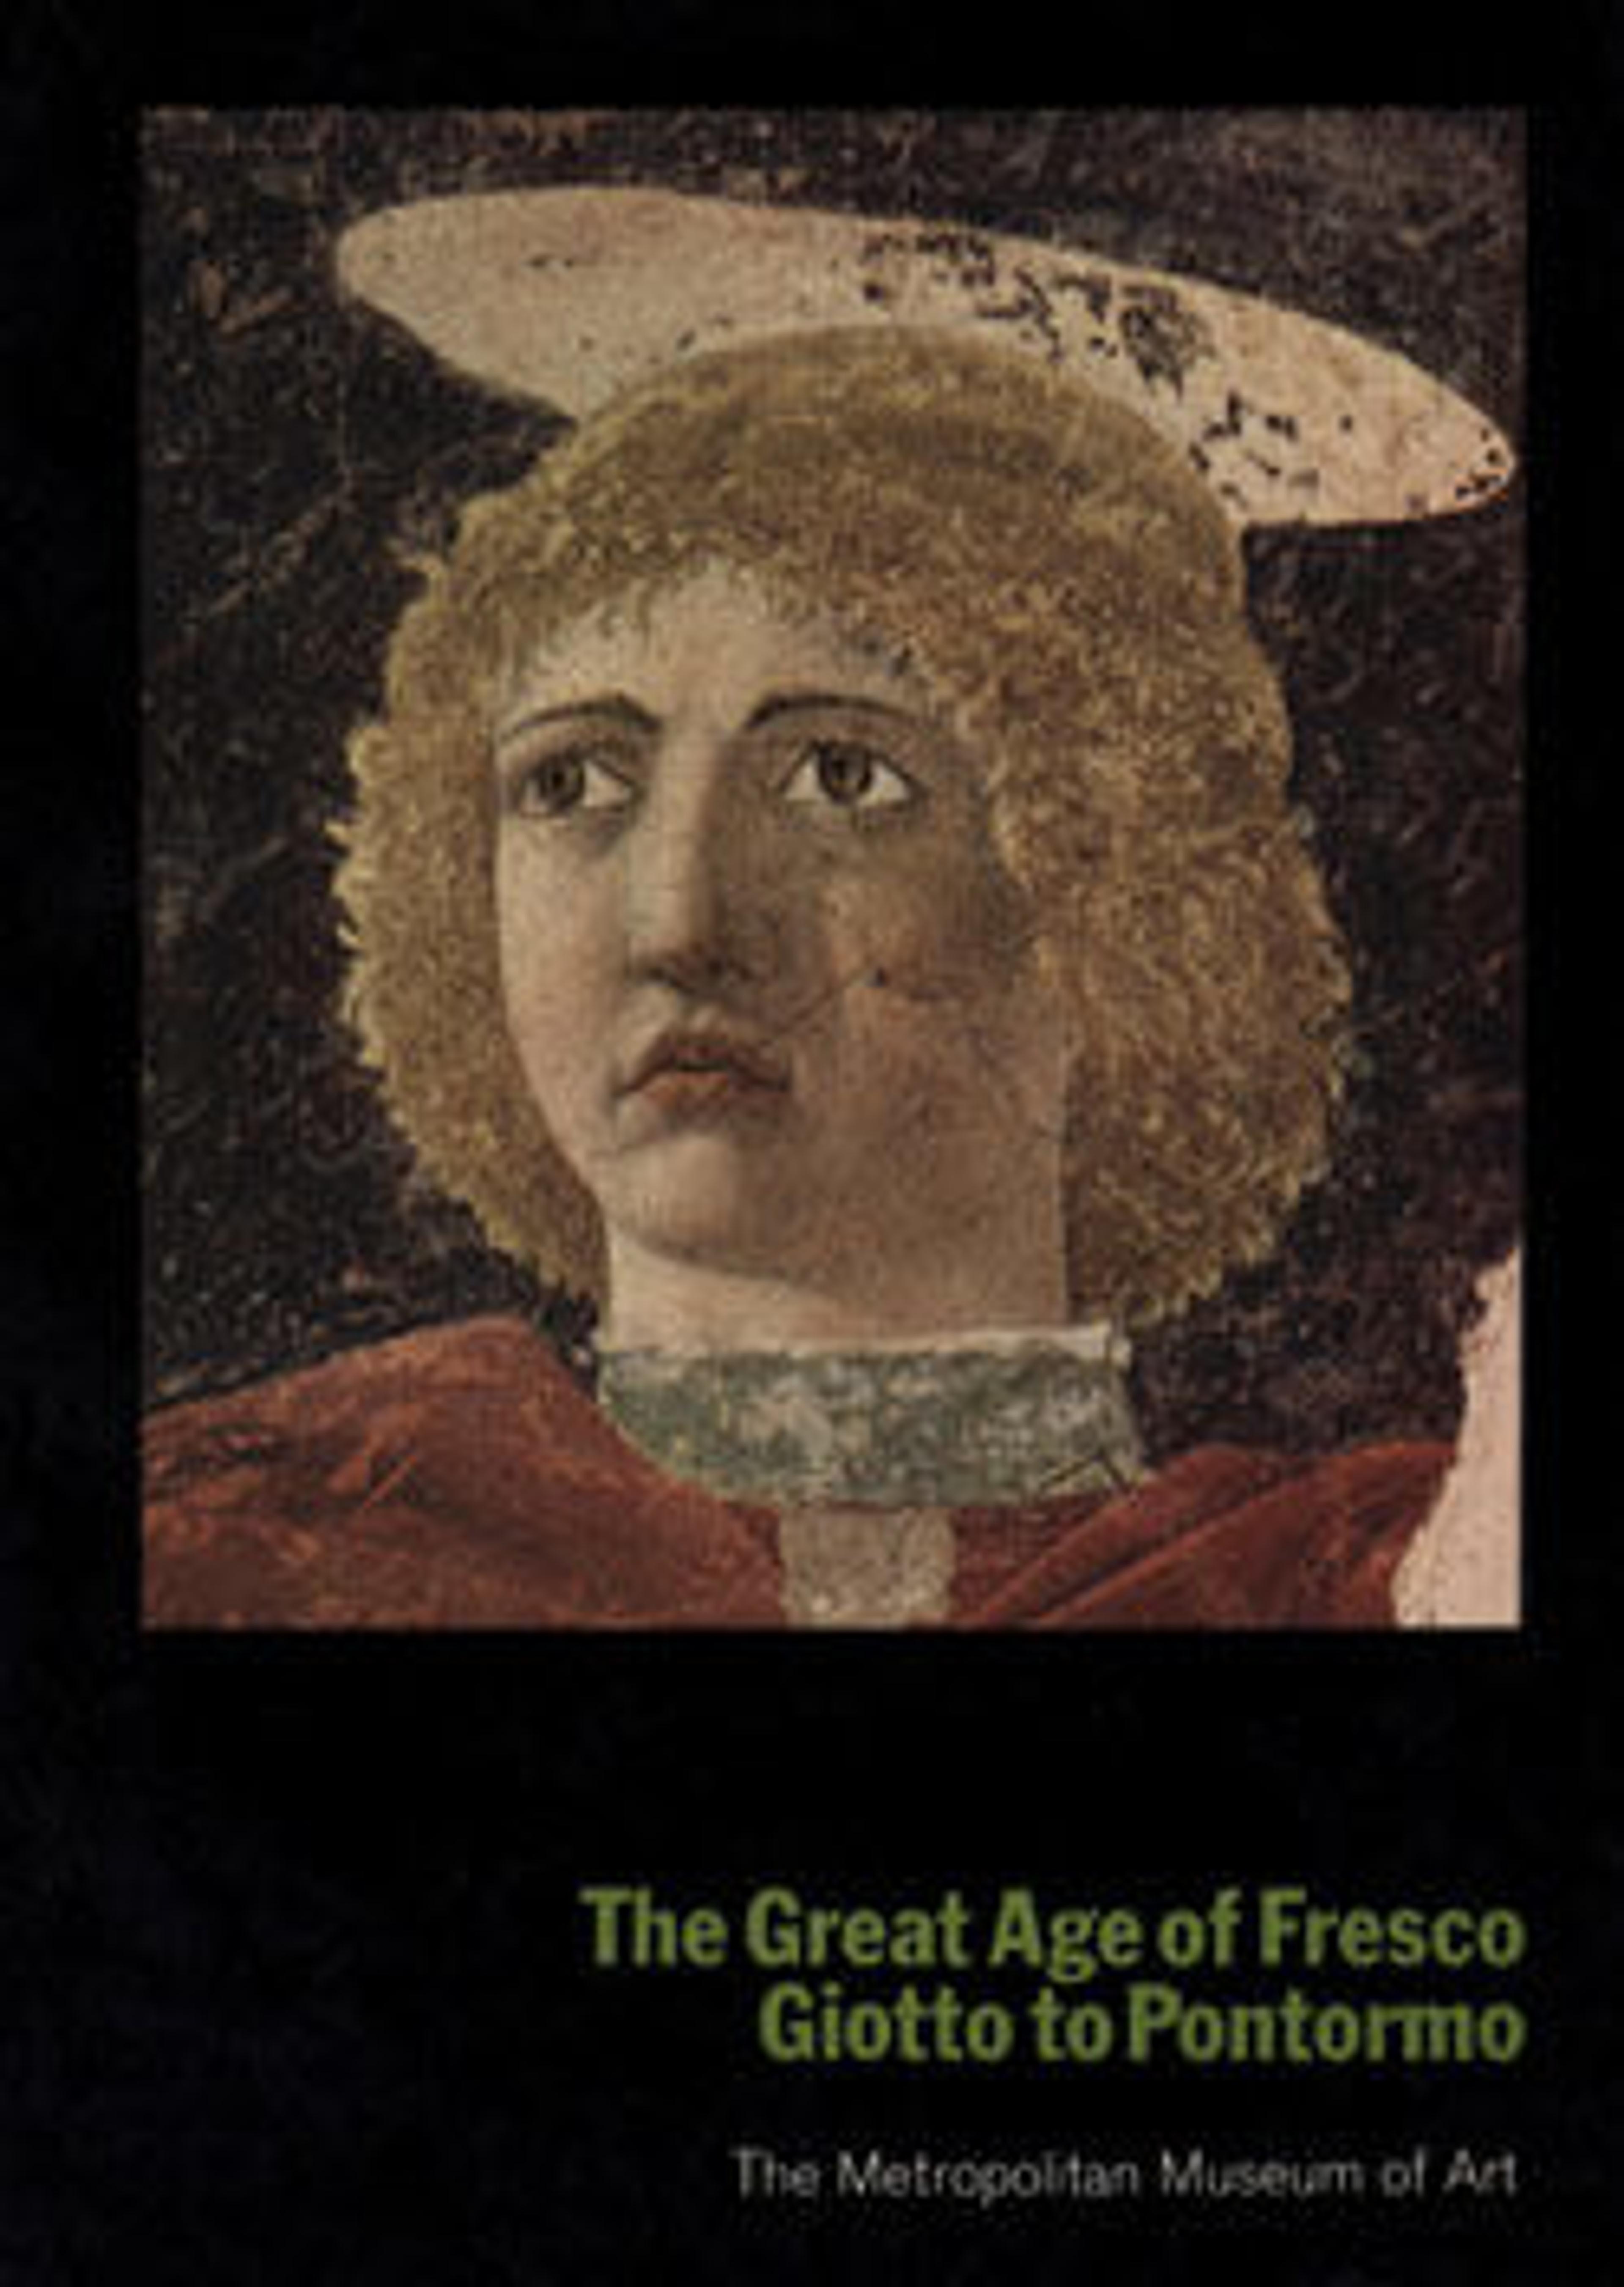 The Great Age of Fresco: Giotto to Pontormo. An Exhibition of Mural Paintings and Monumental Drawings